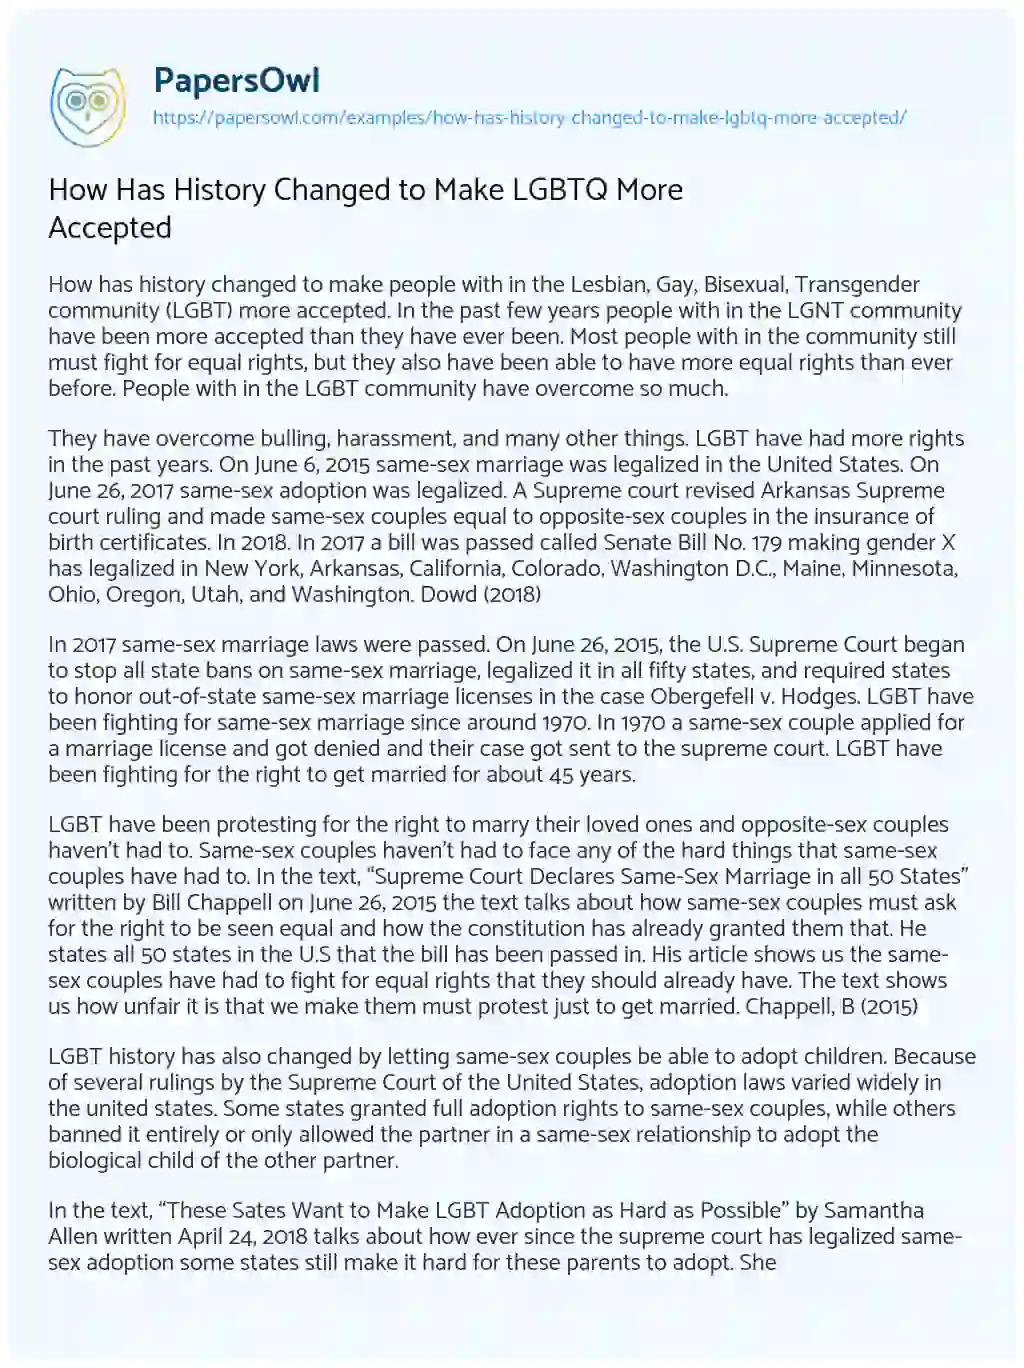 How has History Changed to Make LGBTQ more Accepted essay